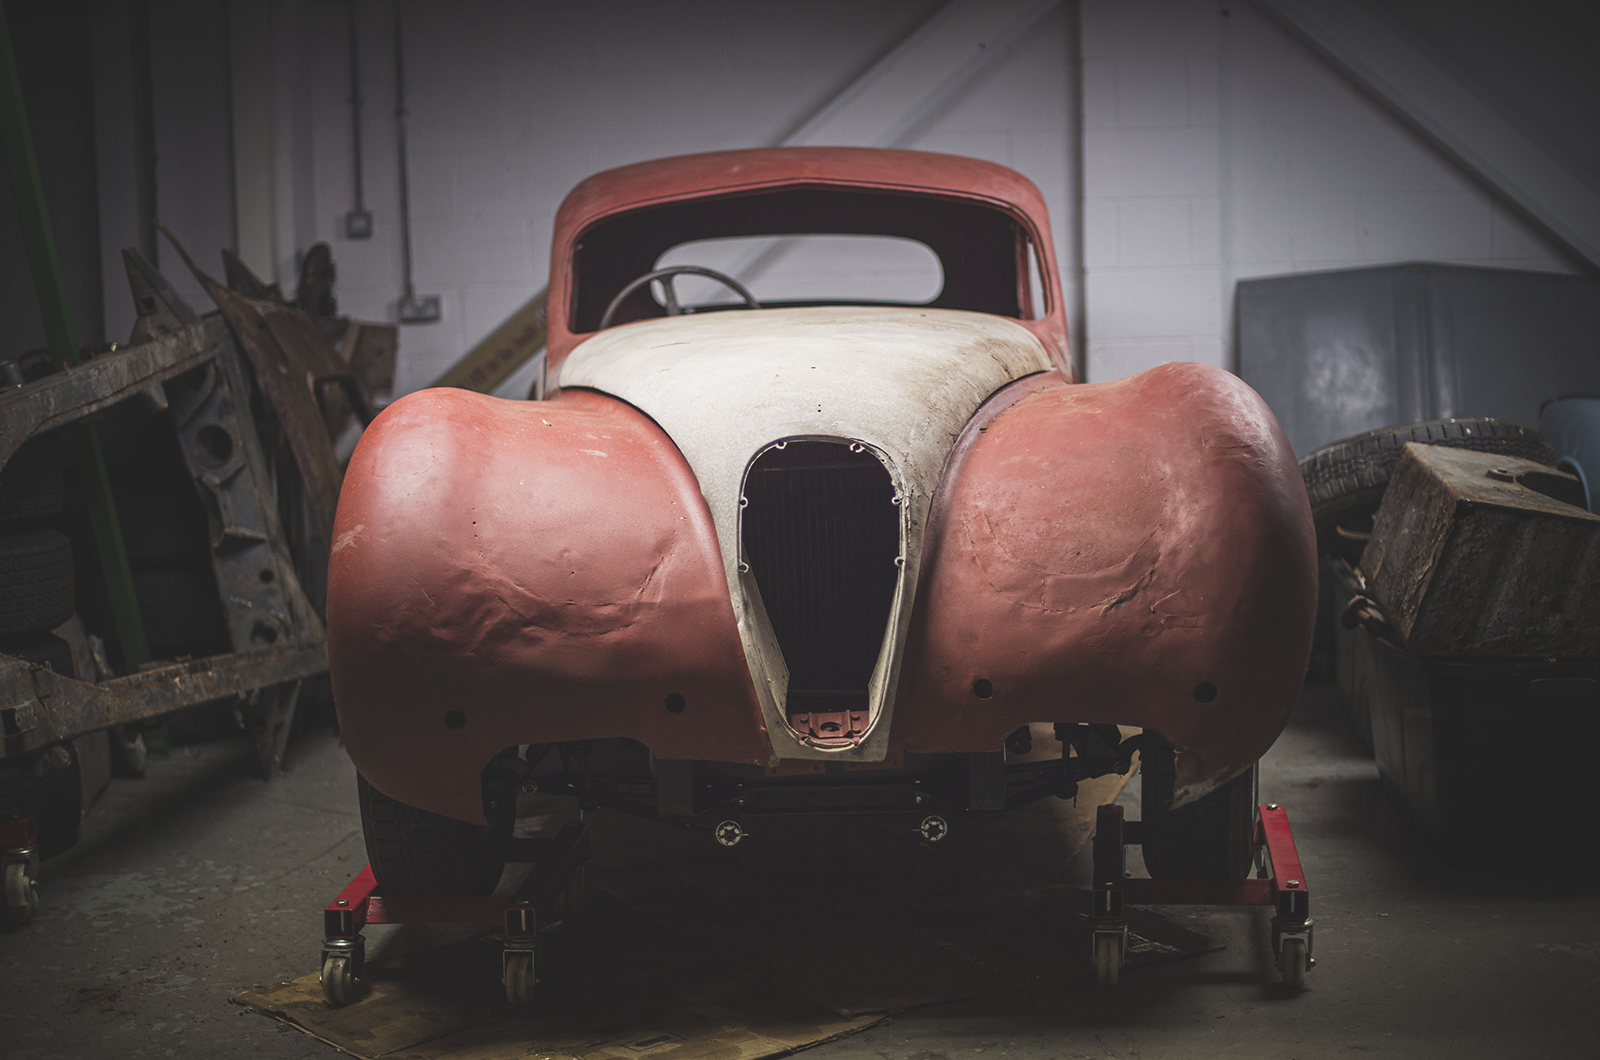 Classic & Sports Car – Fancy a project? Try this barn-find Jaguar XK120